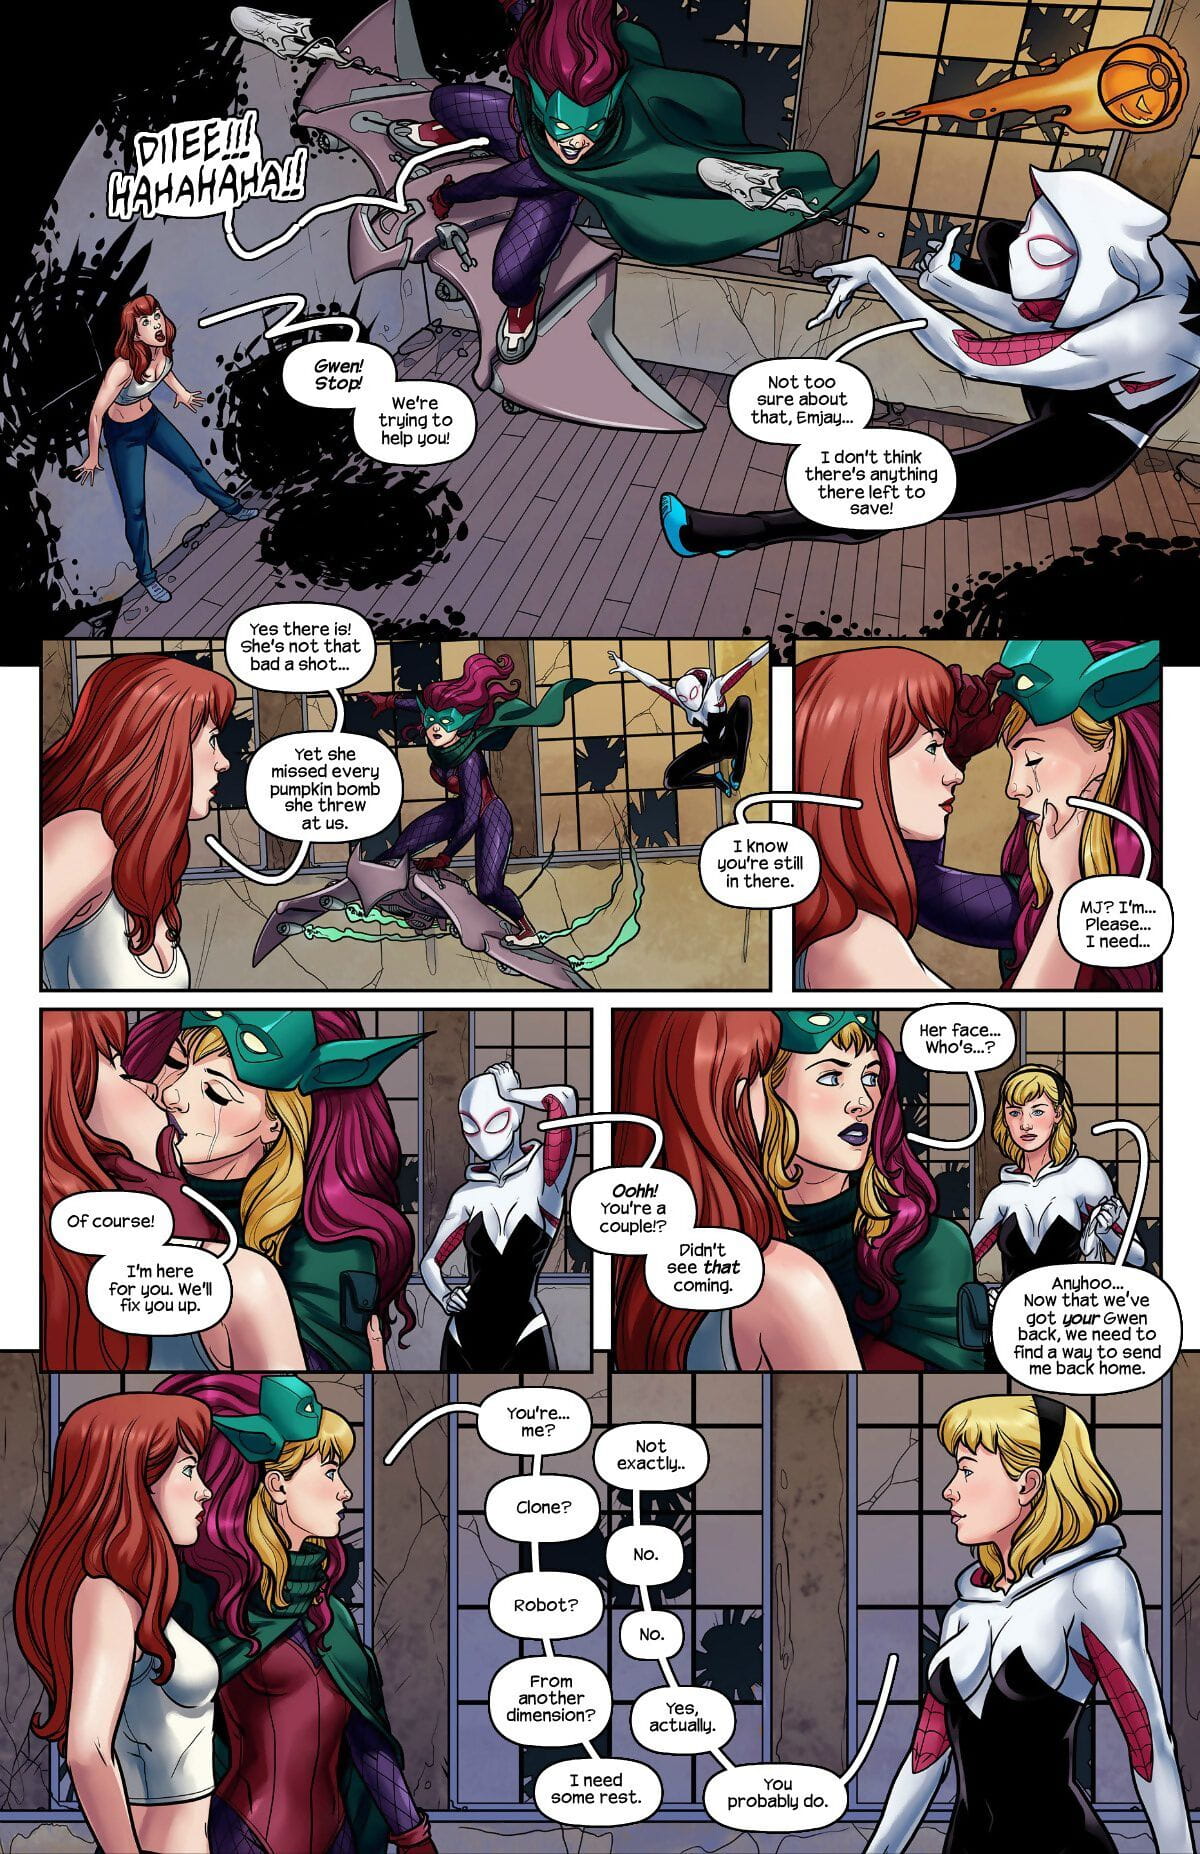 Tracy assiolo ghost spider vs. Verde goblin page 1